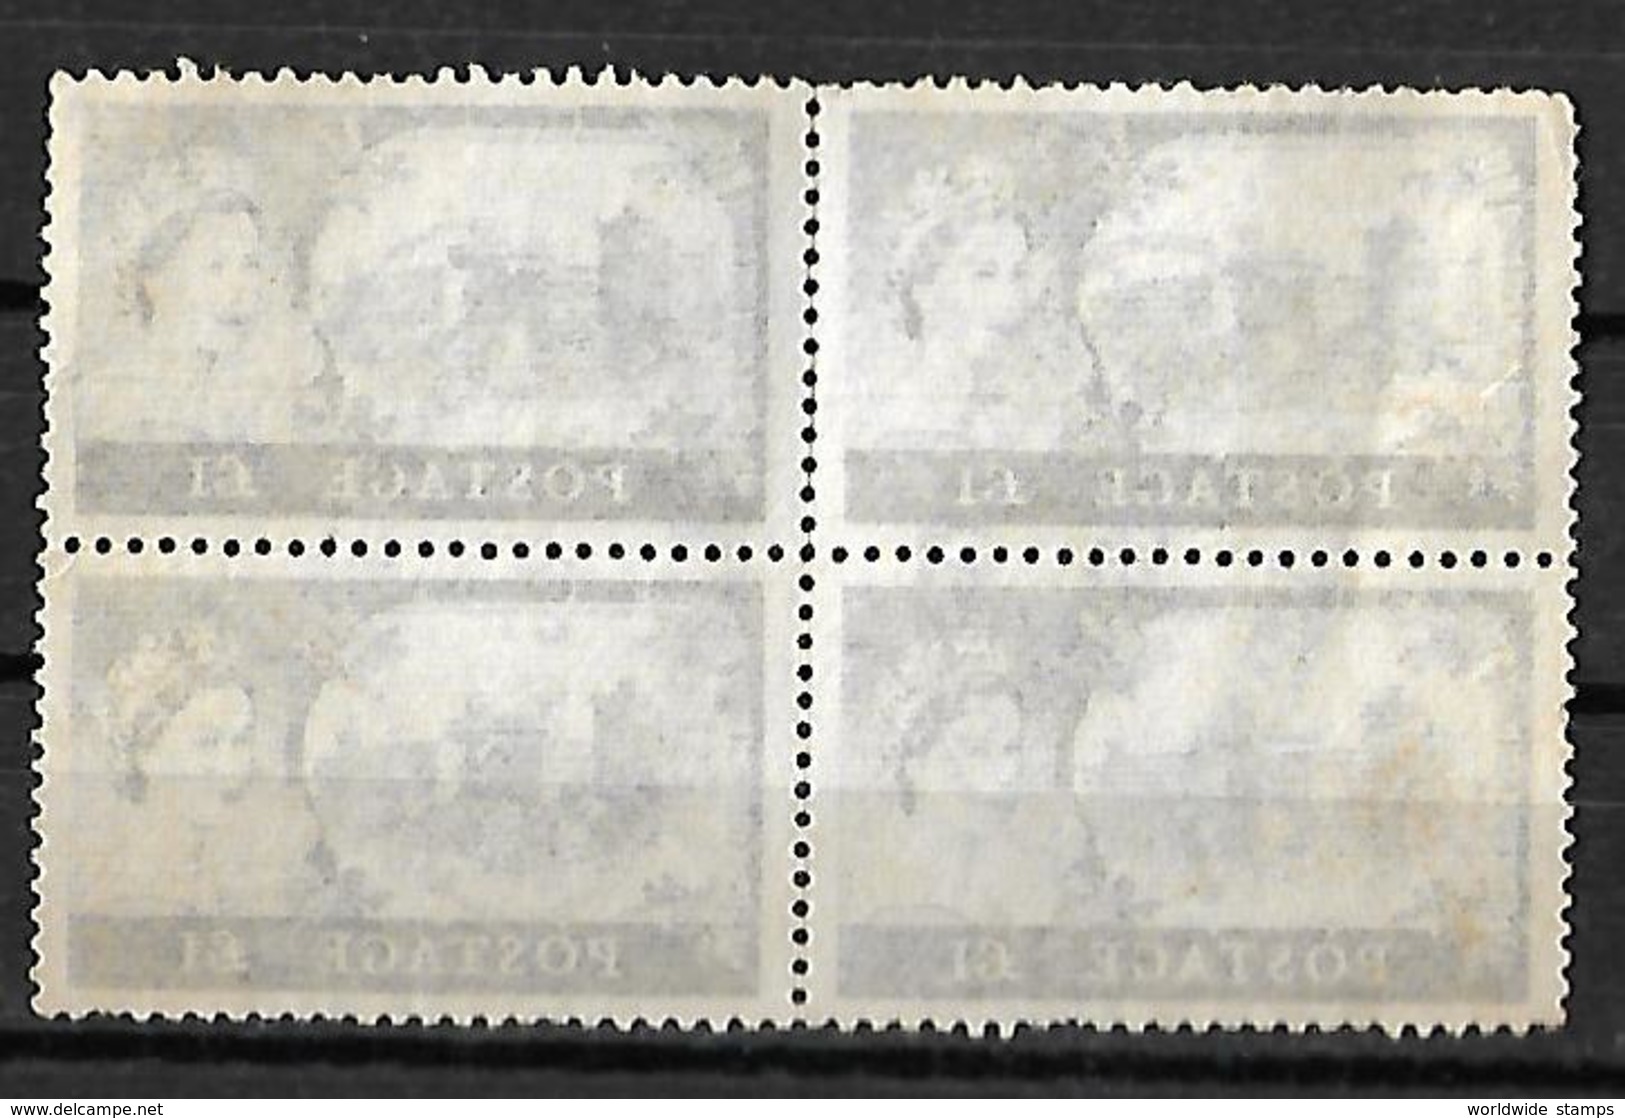 Great Britain 1959 £1 Wilding Castle  Block Of 4 England  High Value Used Stamps - Nuevos